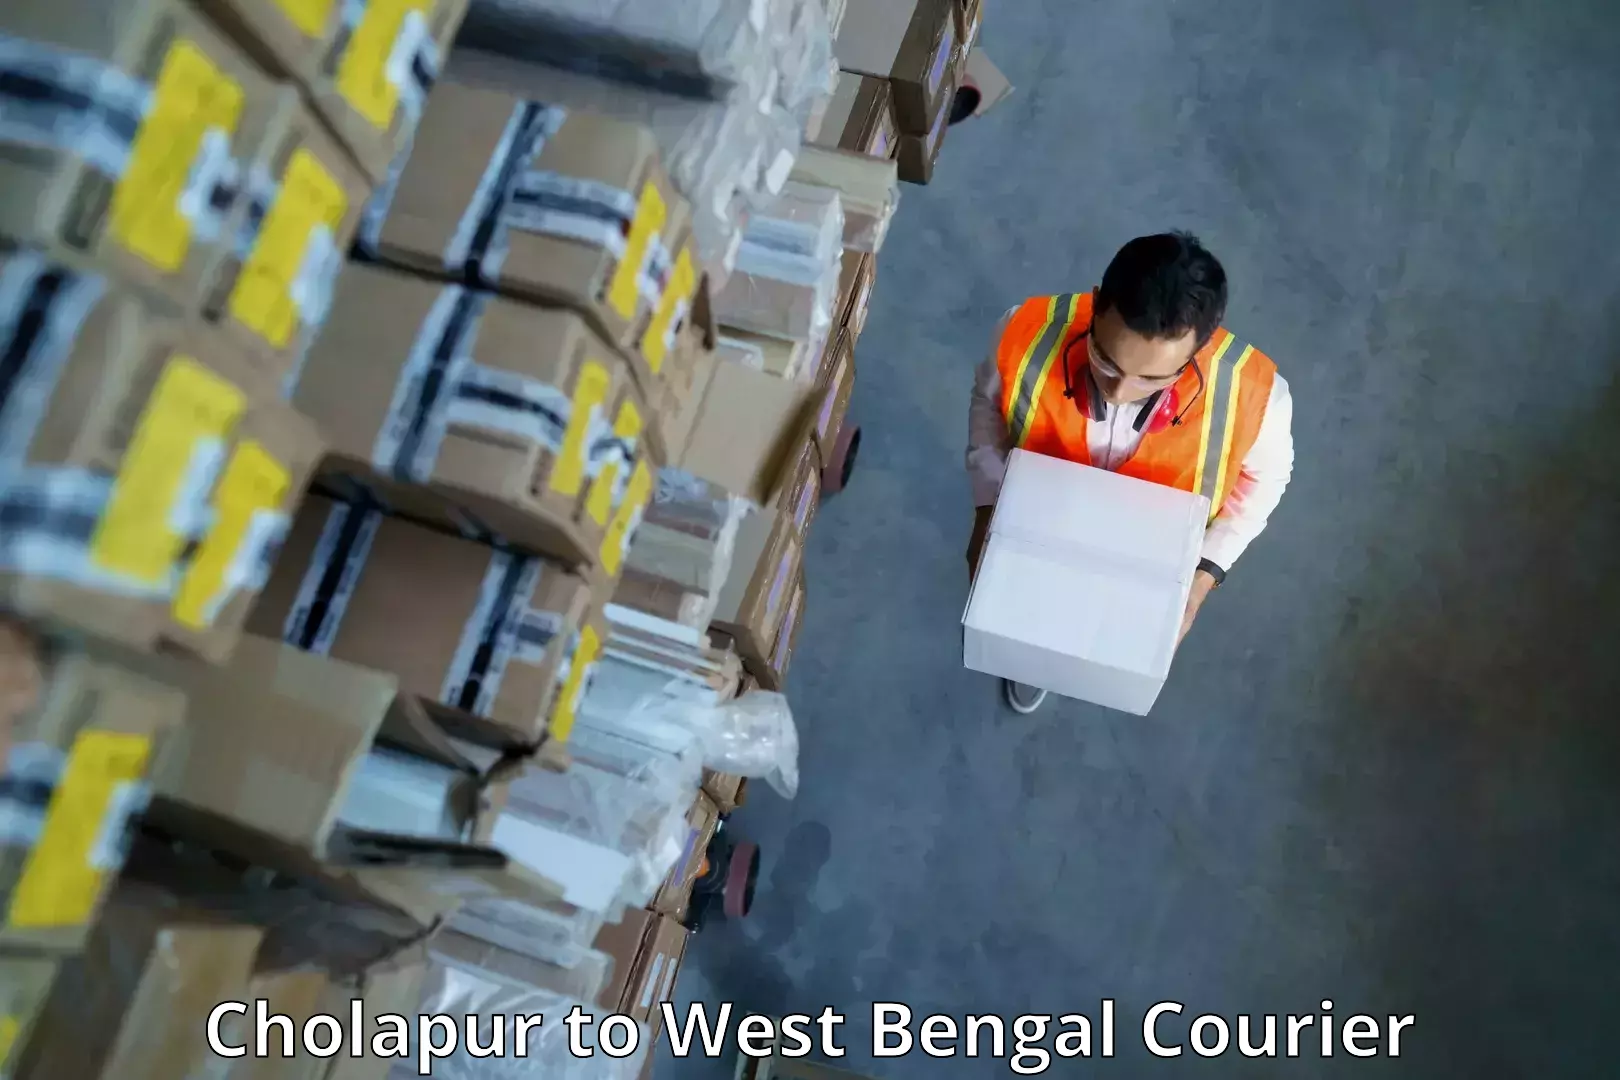 Advanced shipping network Cholapur to West Bengal